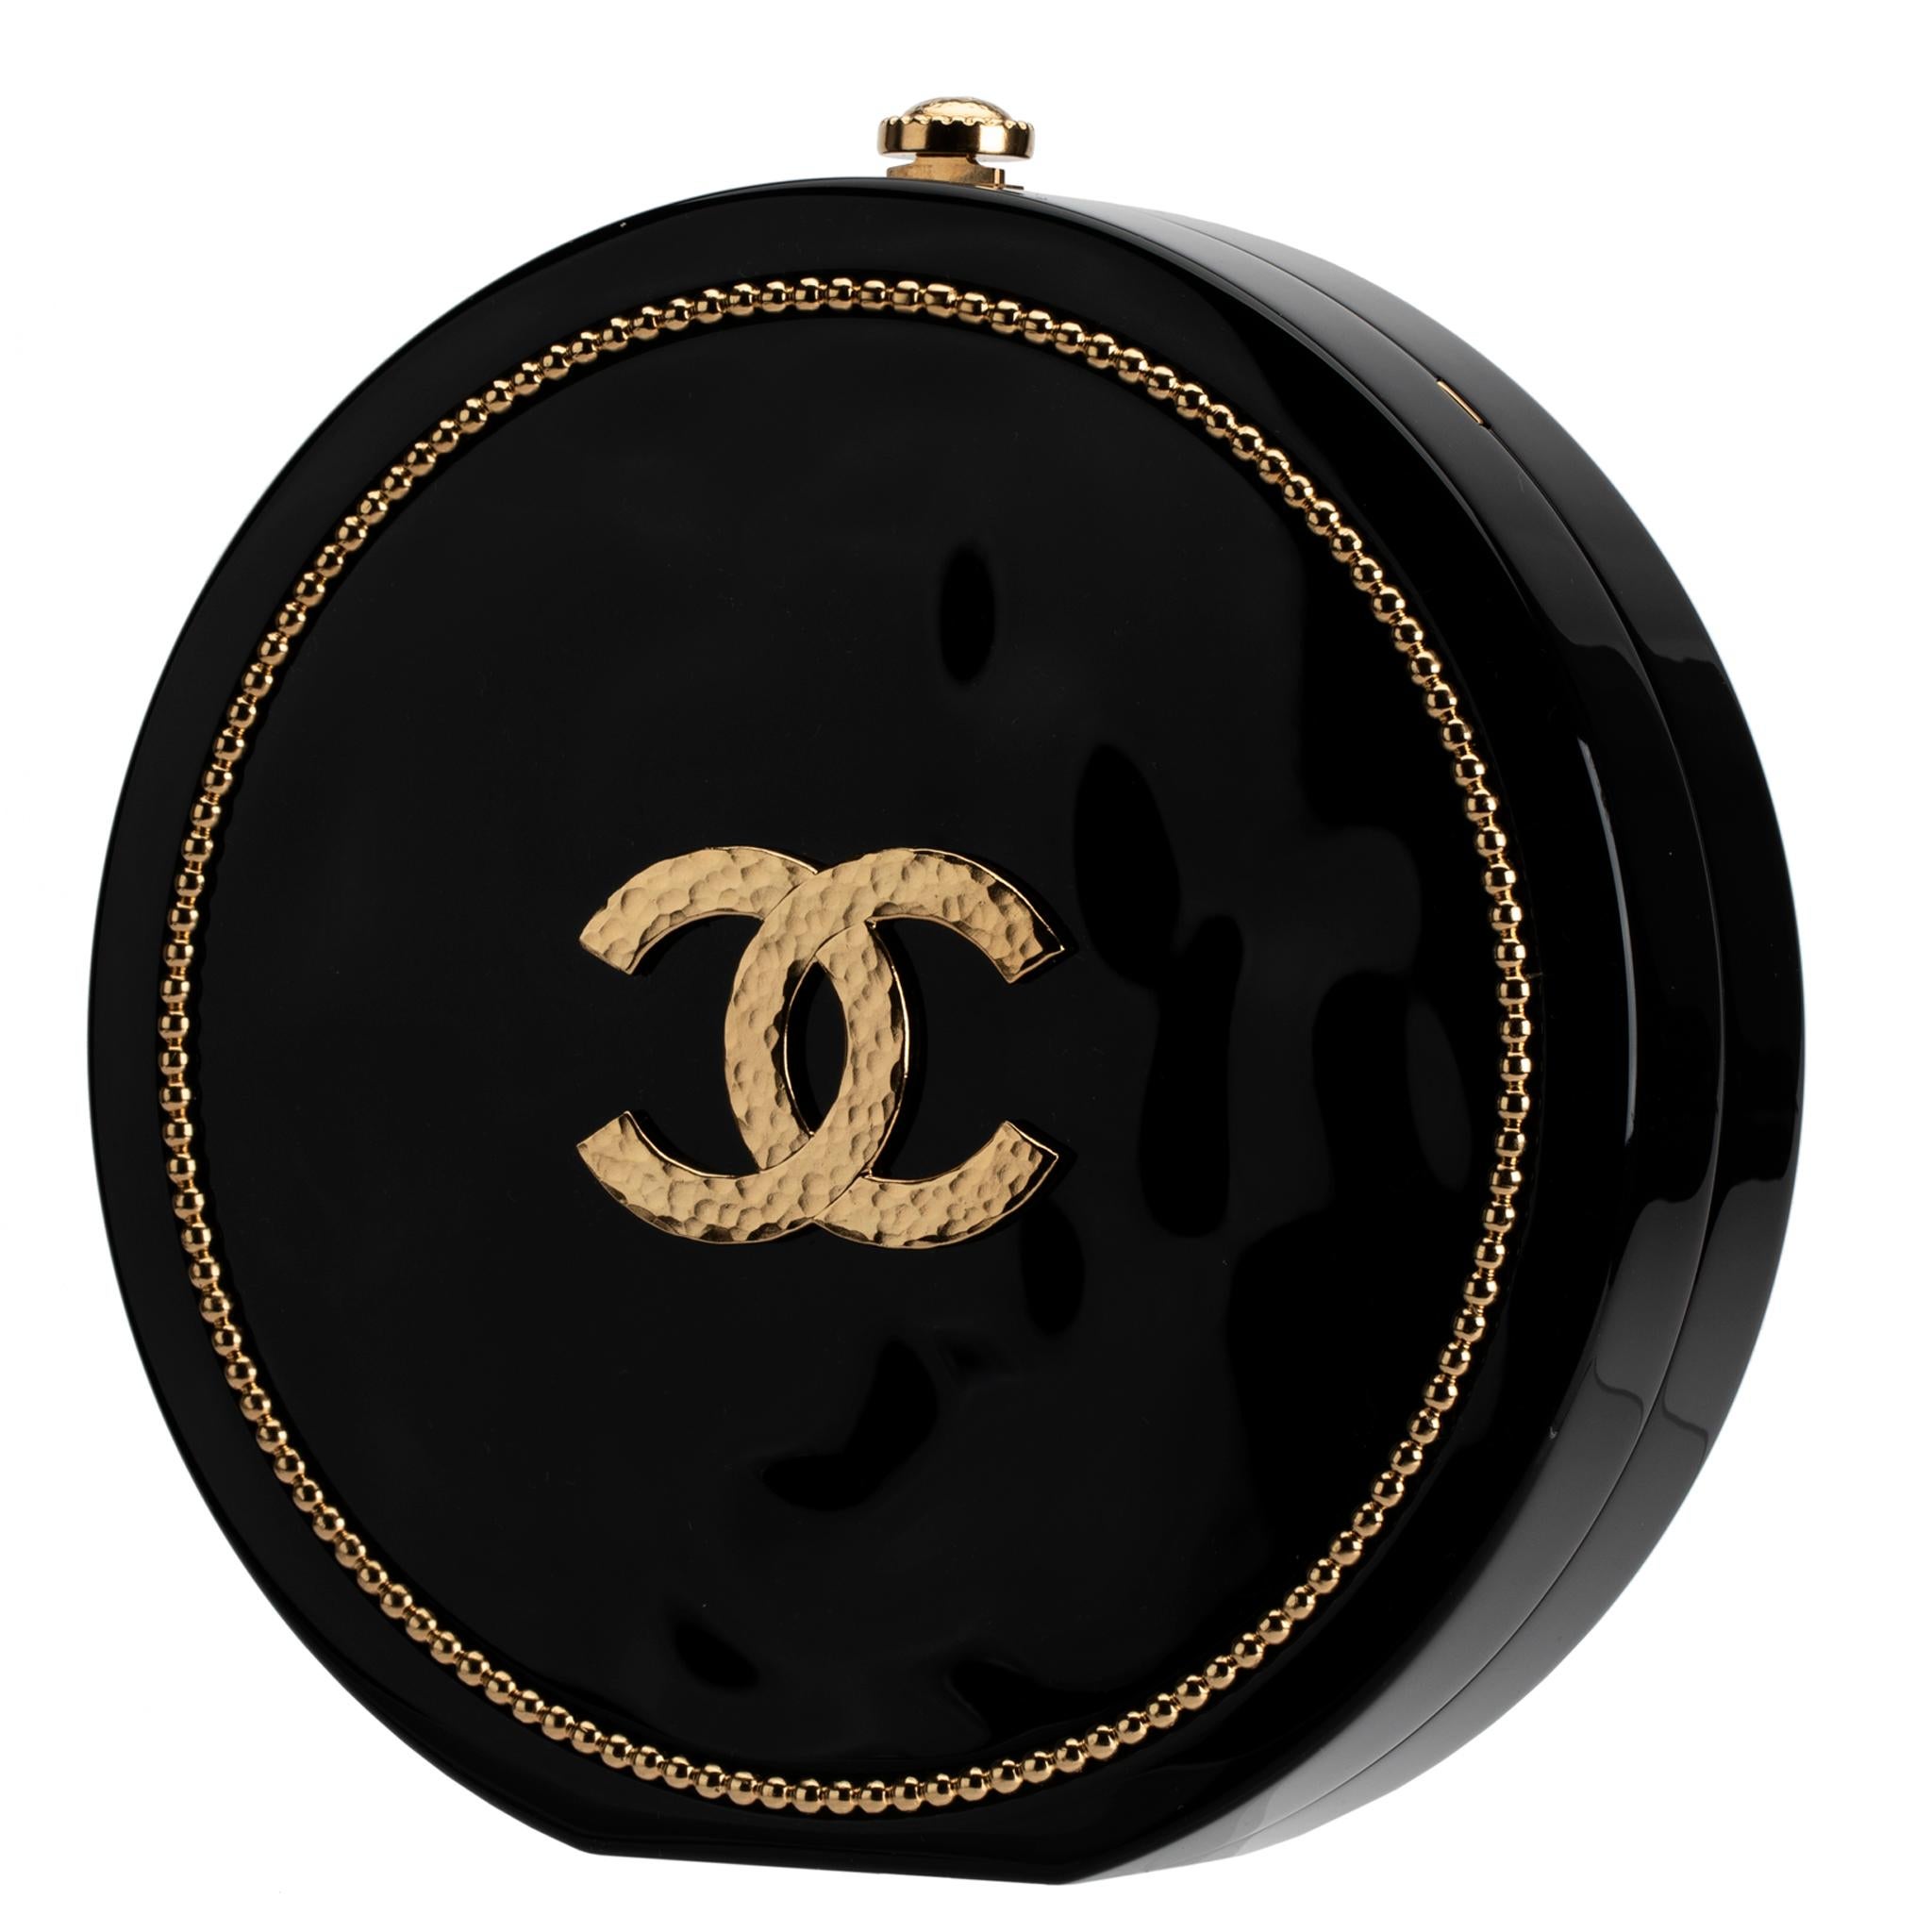 Chanel Minaudière Limited Edition Black Plexiglass & Gold Owl Gold-Tone Hardware In Excellent Condition In Sydney, New South Wales